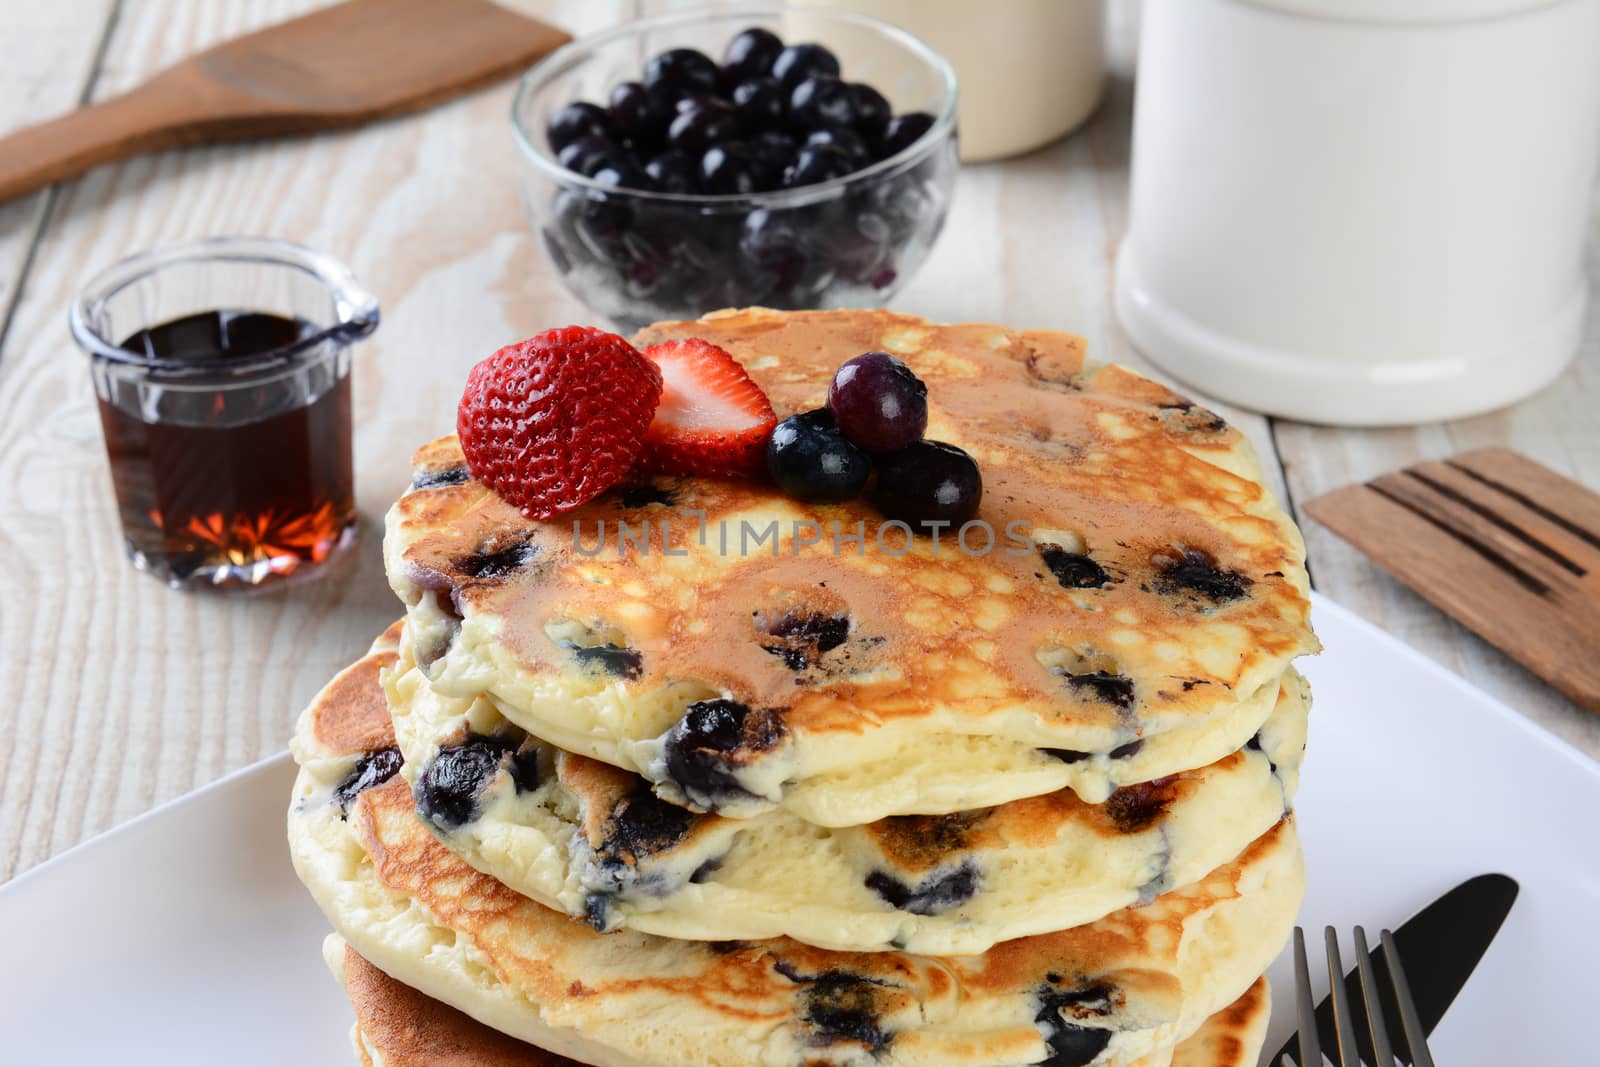 Blueberry Pancake Closeup with syrup pitcher, wooden spatula and fork, blueberry bowl and other items set out for a homemade breakfast. Horizontal format.